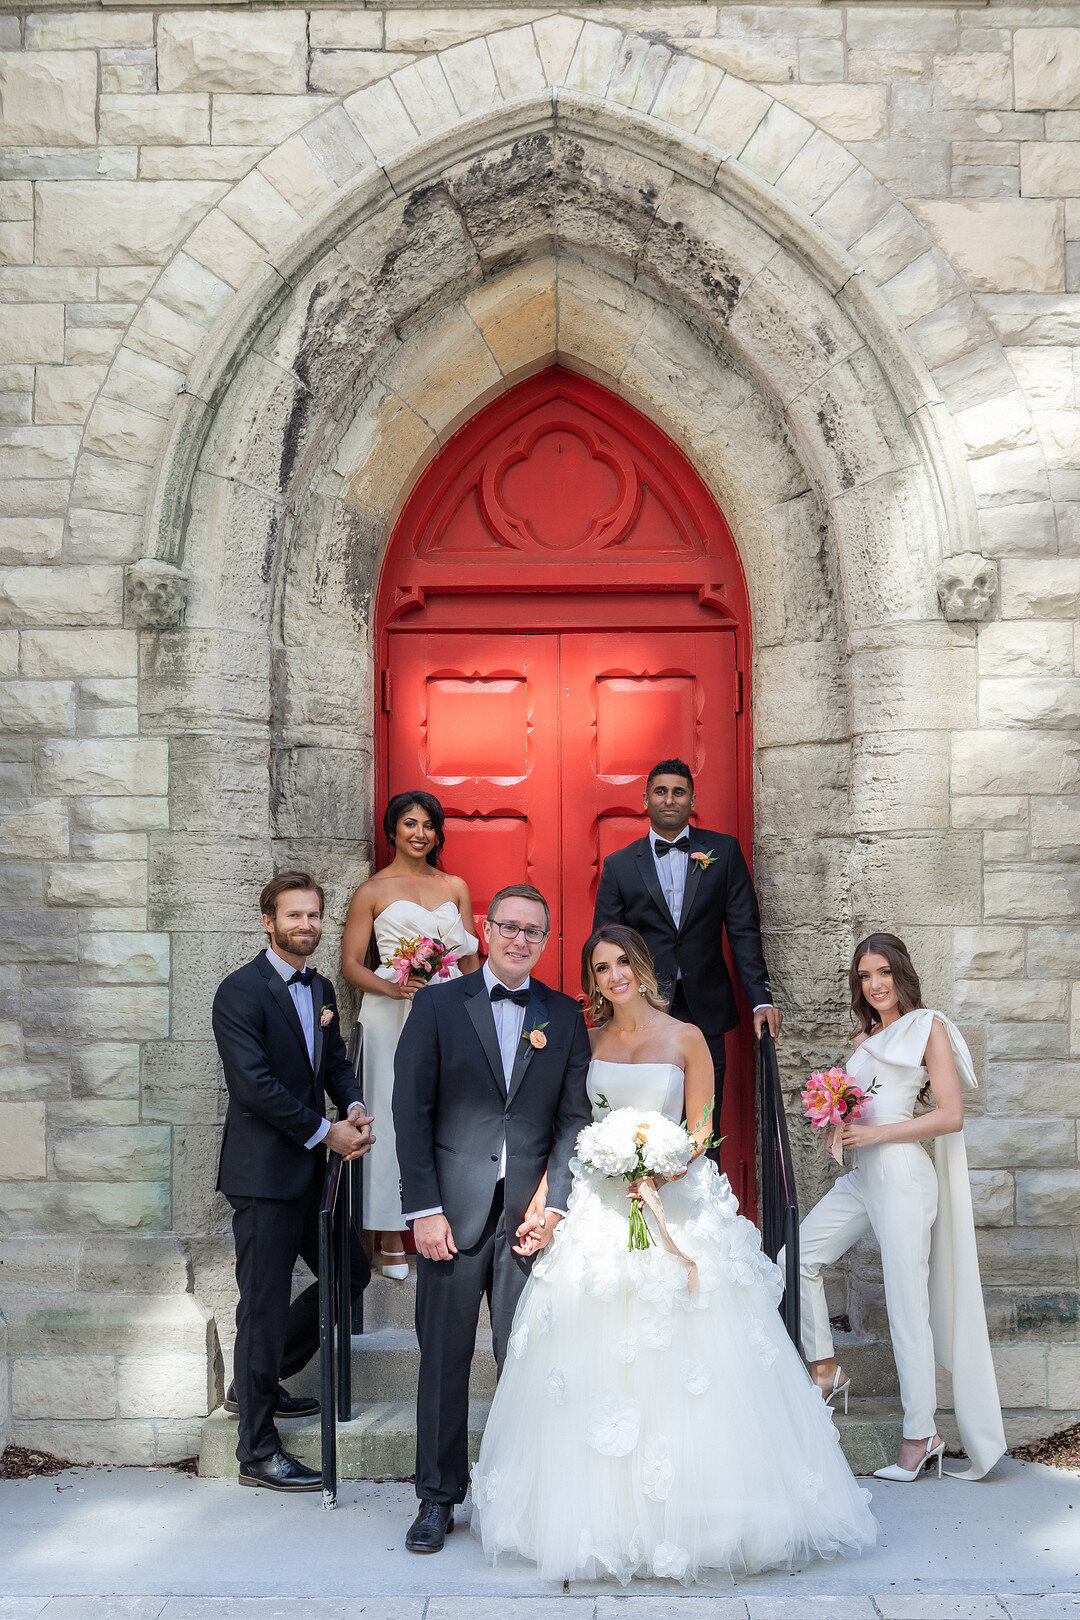 Historic St. James Wedding Styled Shoot captured by Victoria C Photos featured on CHI thee WED